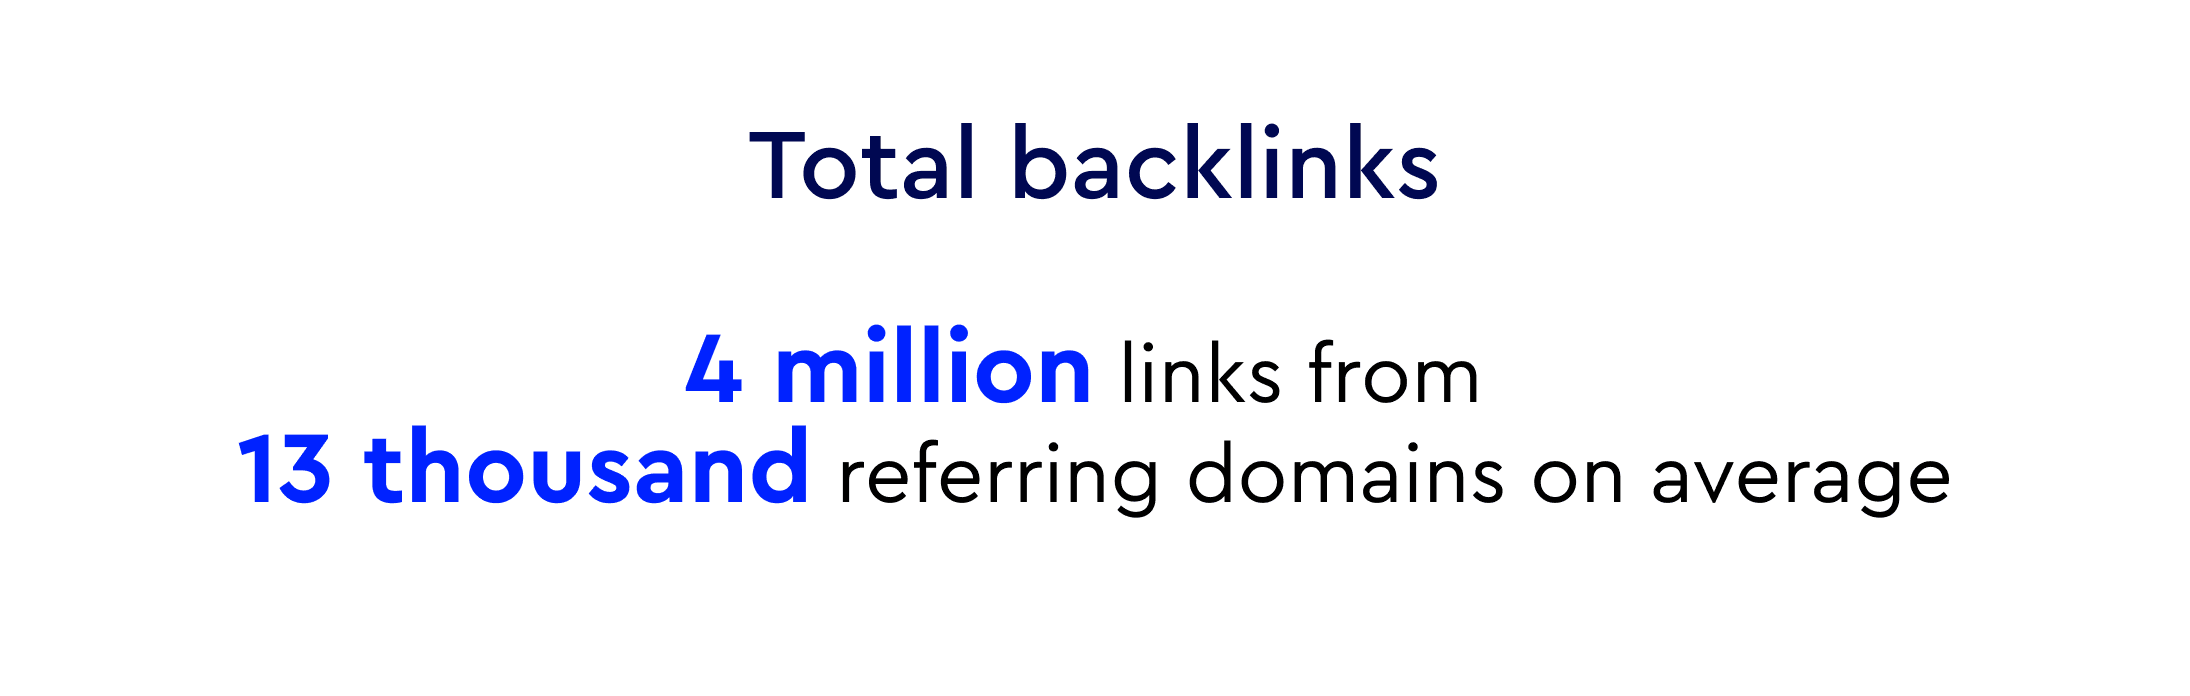 Average total backlinks of the top Spanish ecommerce sites